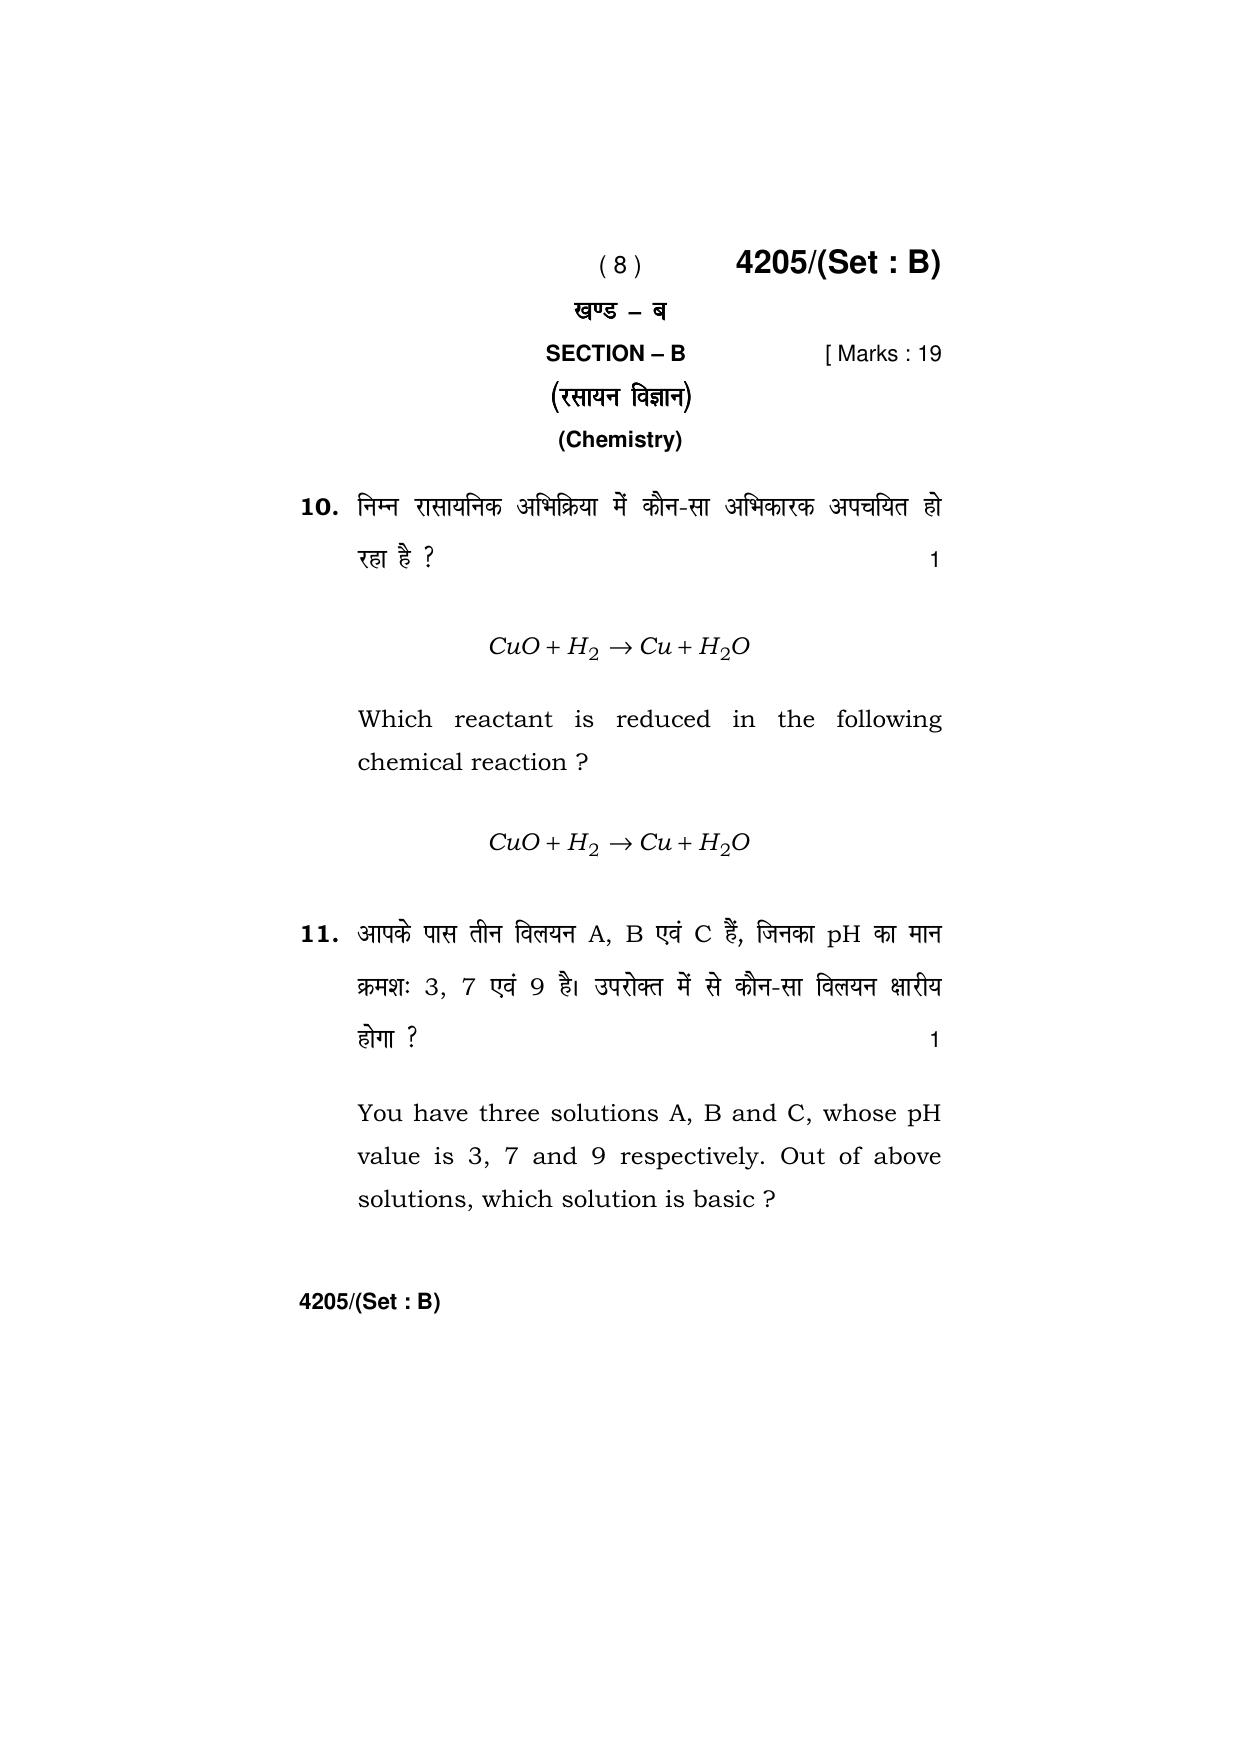 Haryana Board HBSE Class 10 Science (All Set) 2019 Question Paper - Page 24